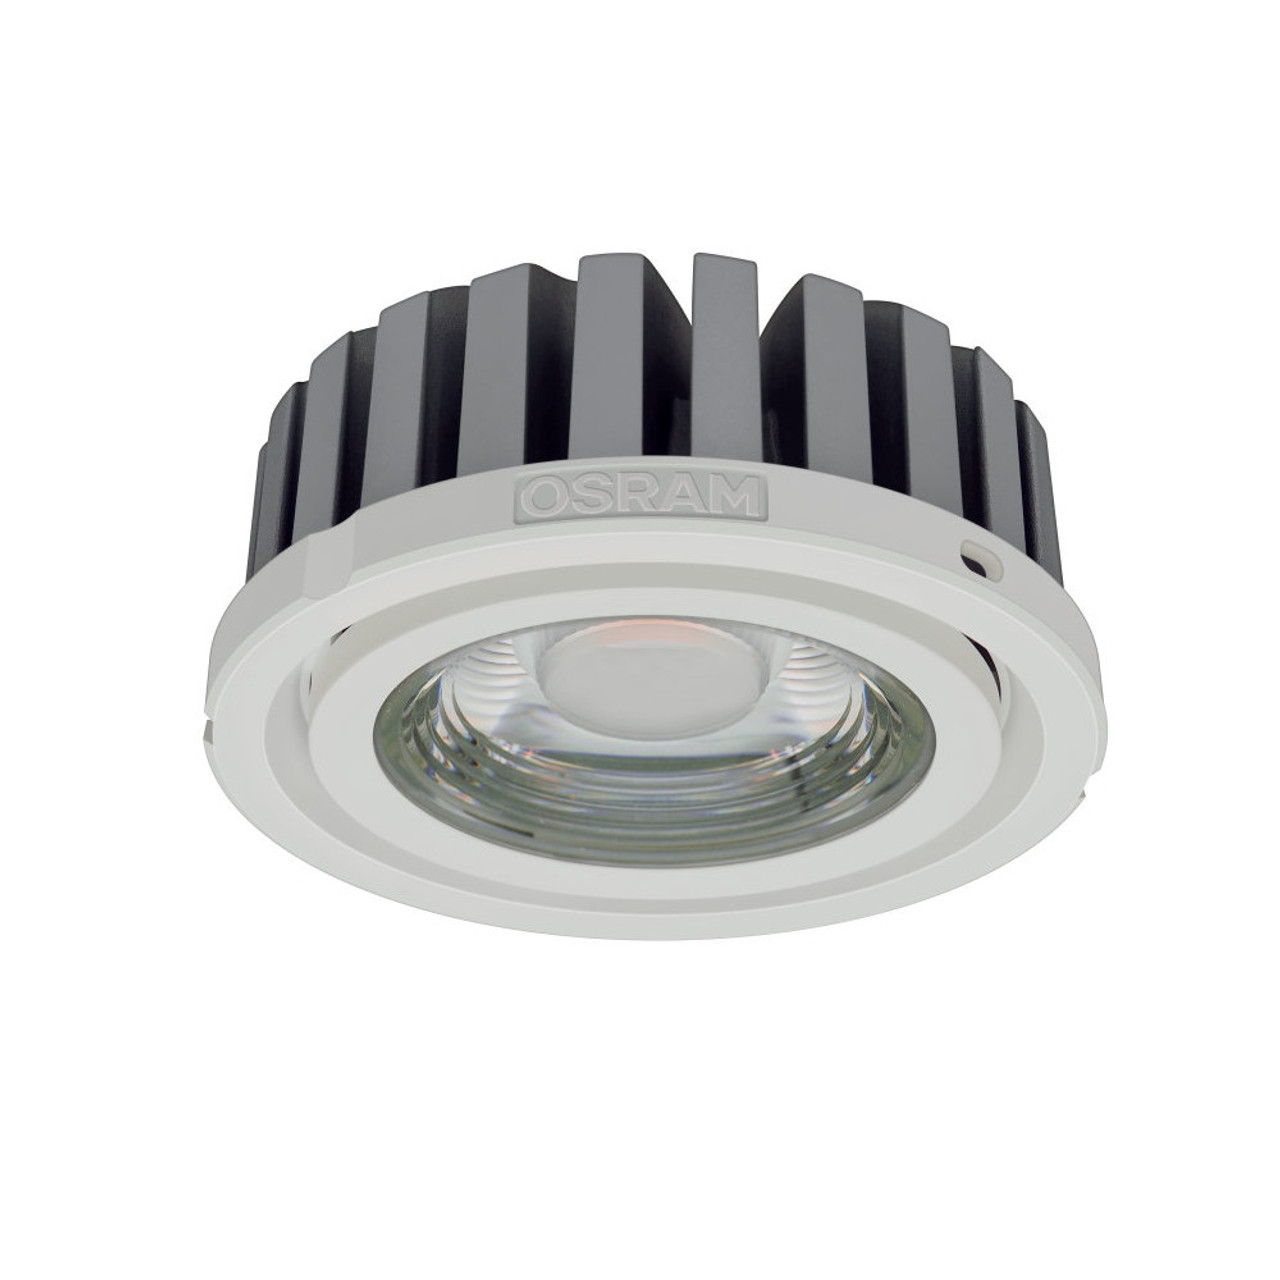 LED 1050mA Constant Current 36.9W Dimmable 930 3000K 3450lm 24 degrees COB